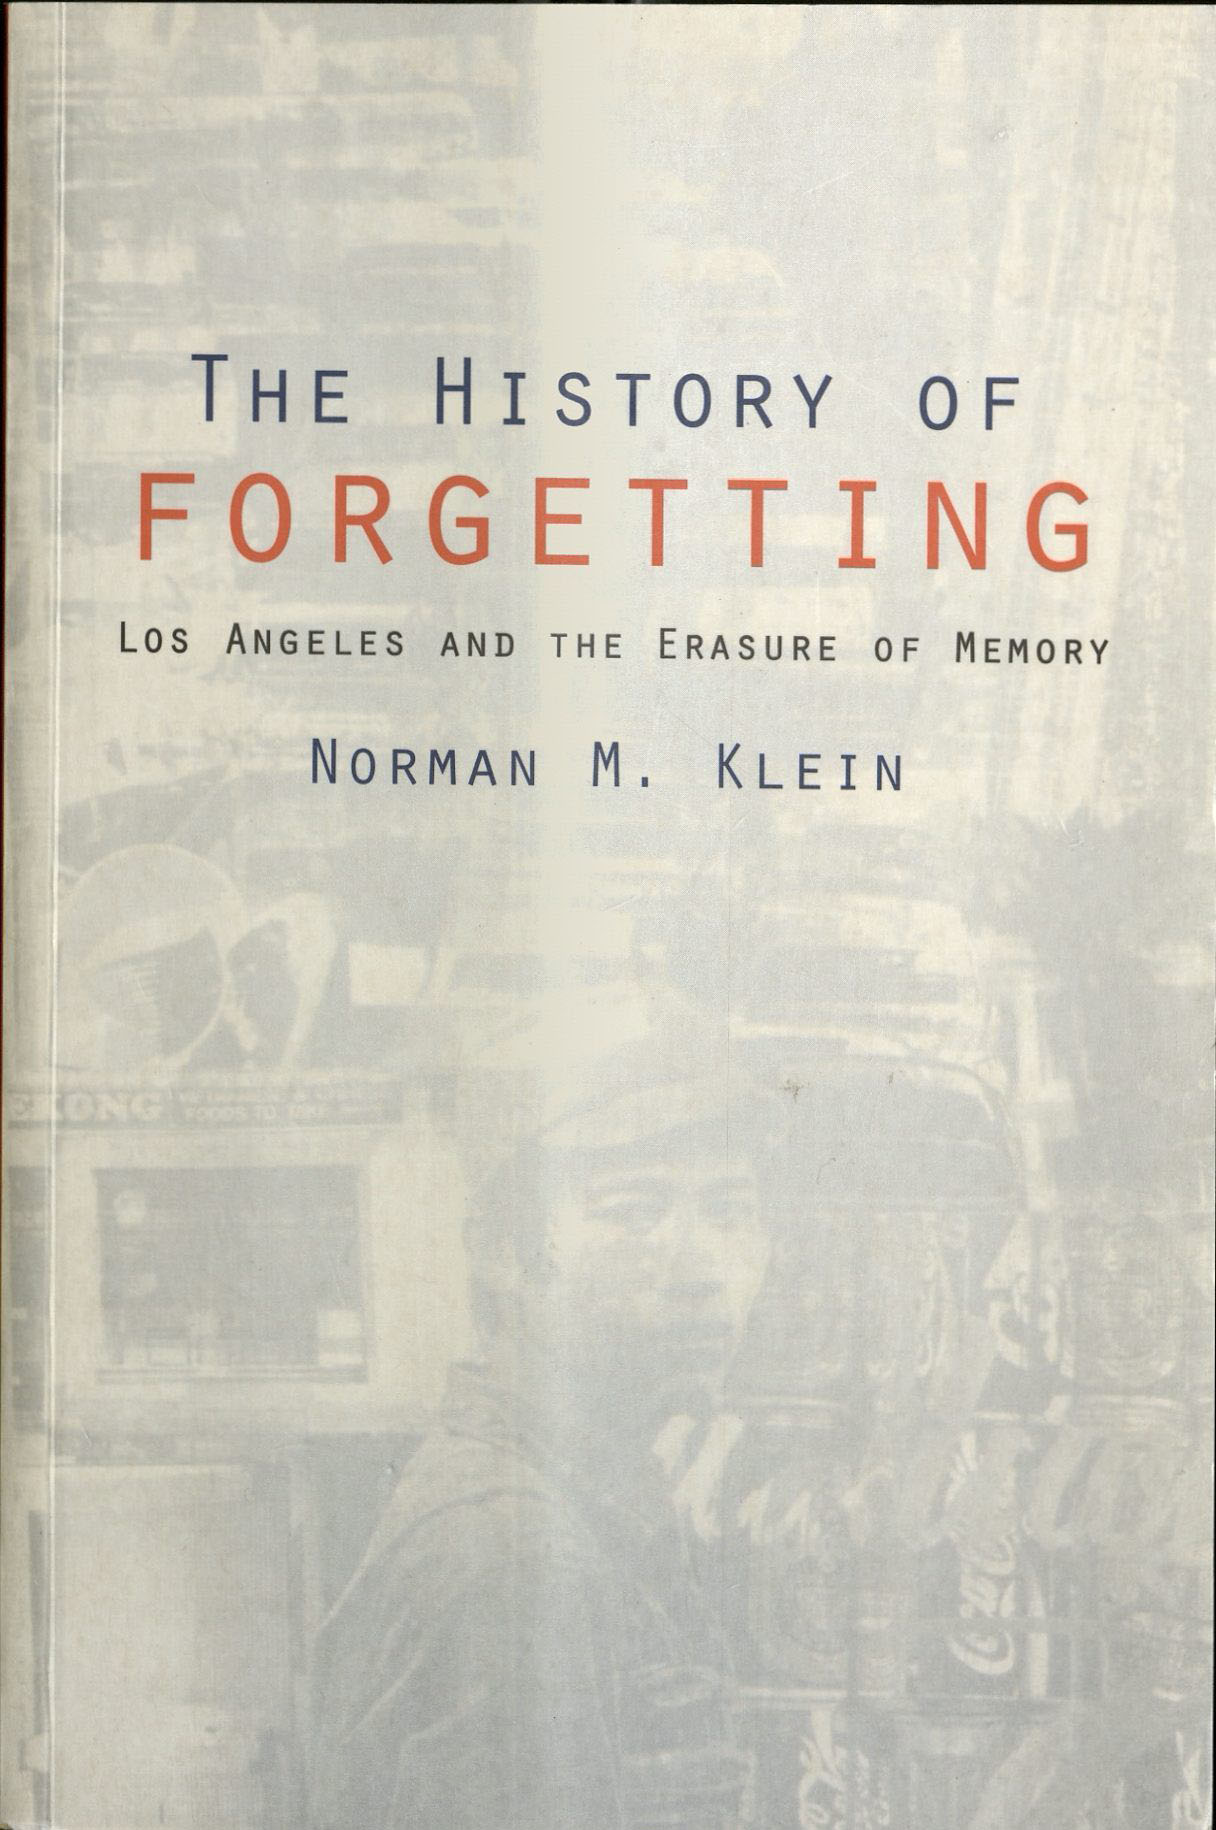 The History of Forgetting: Los Angeles and the Erasure of Memory; Norman M. Kein (book cover)